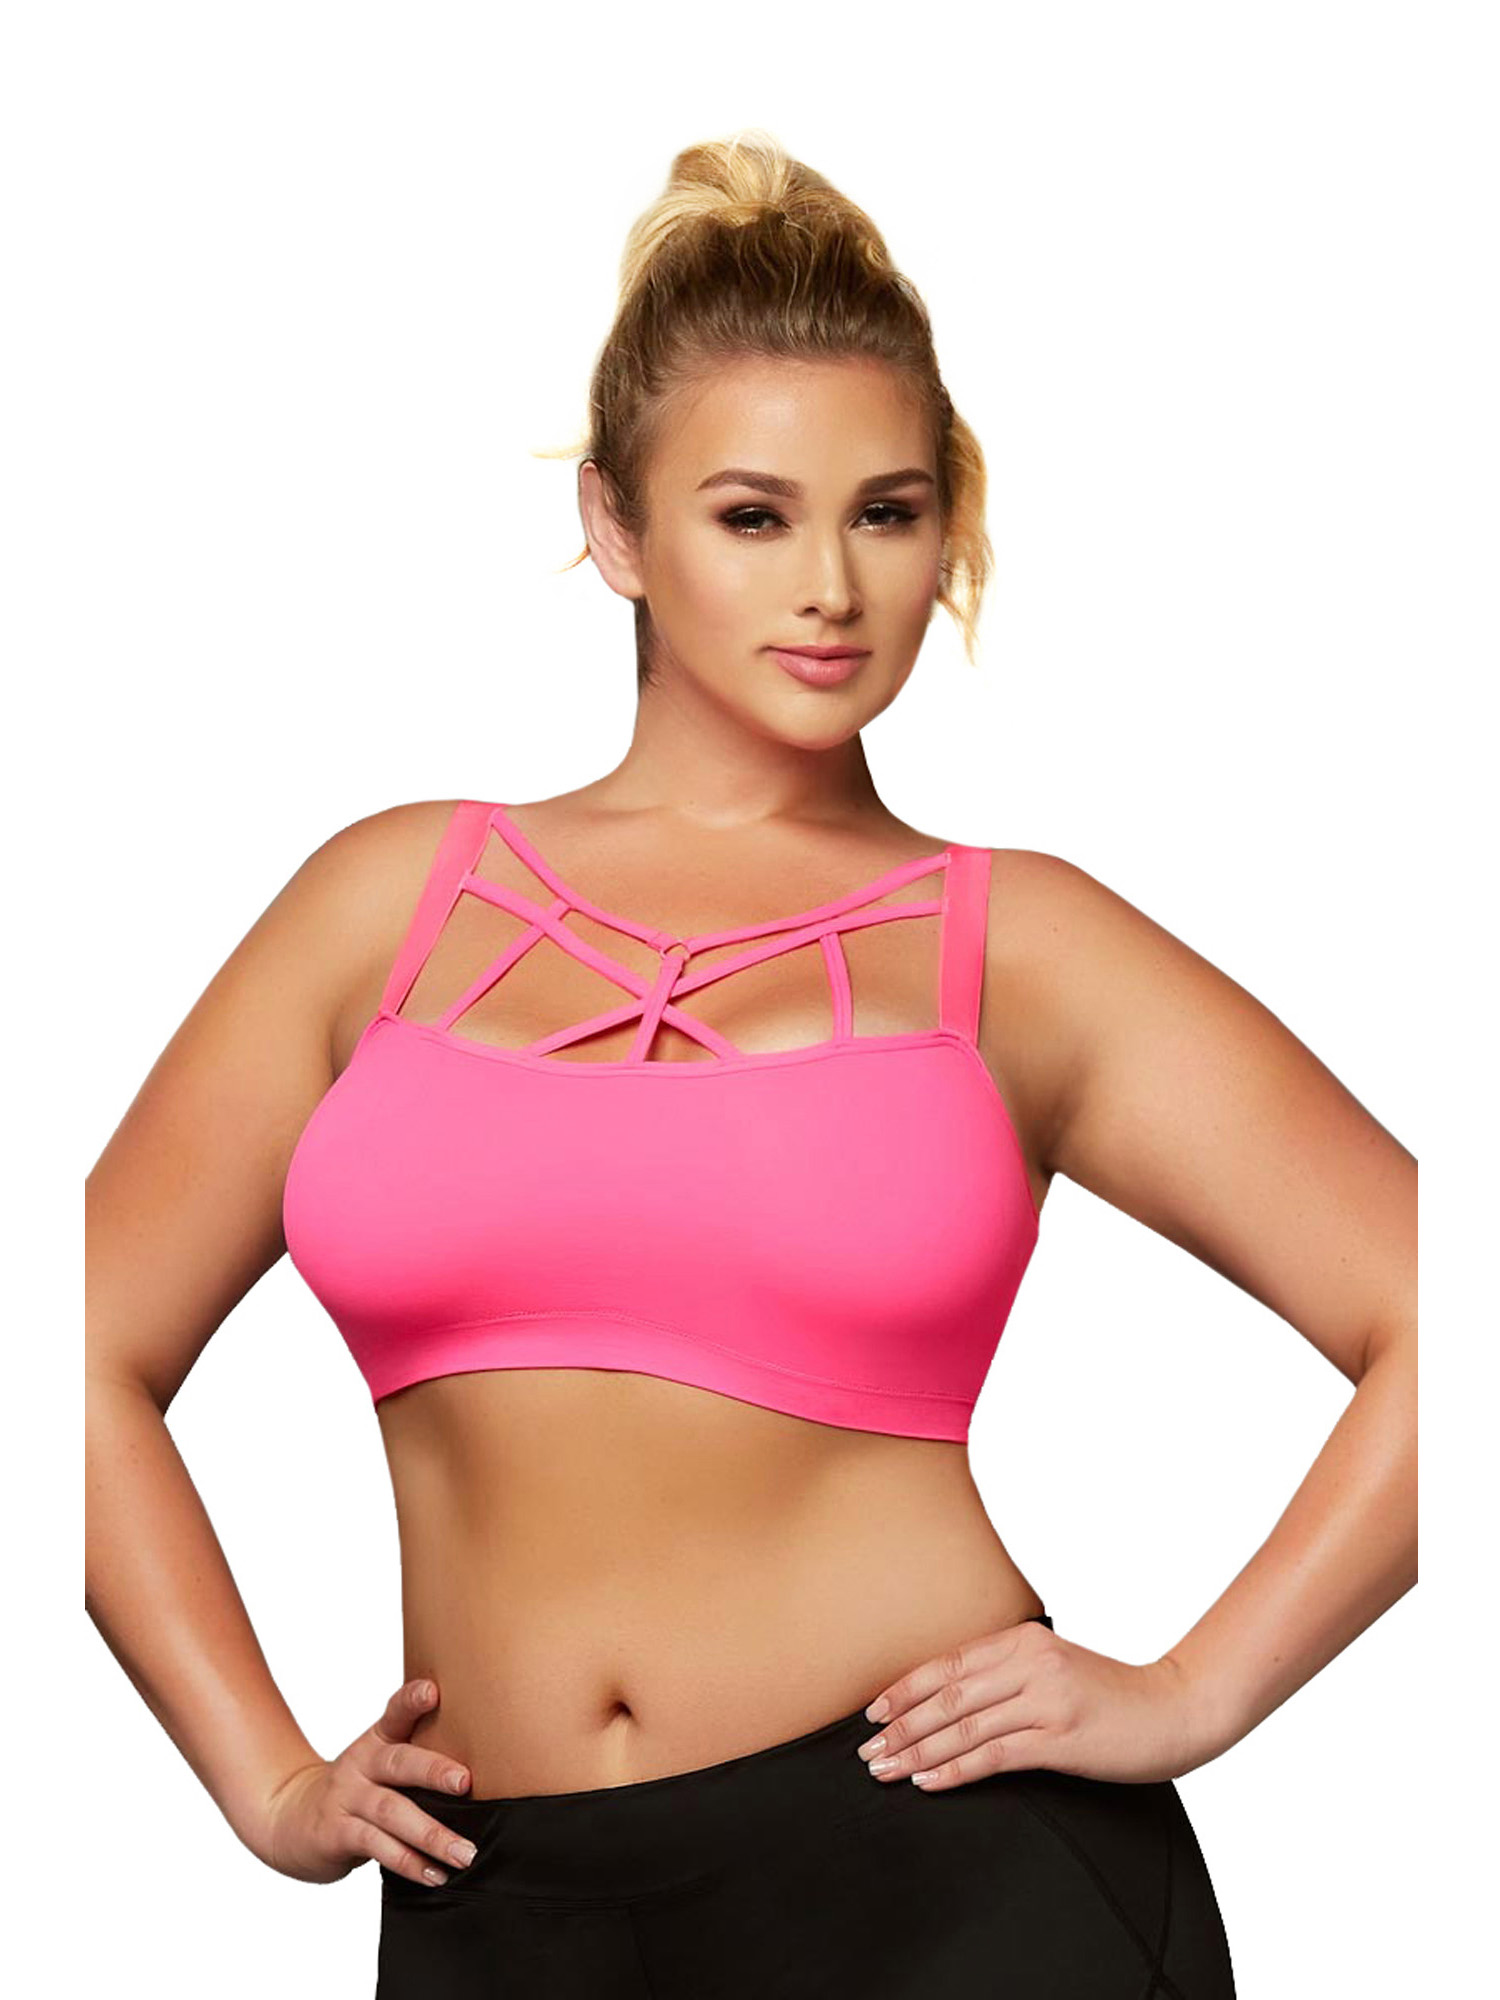 Womens Plus Size Athletic Seamless Strappy Detail Active Sports Bra Top - image 1 of 3